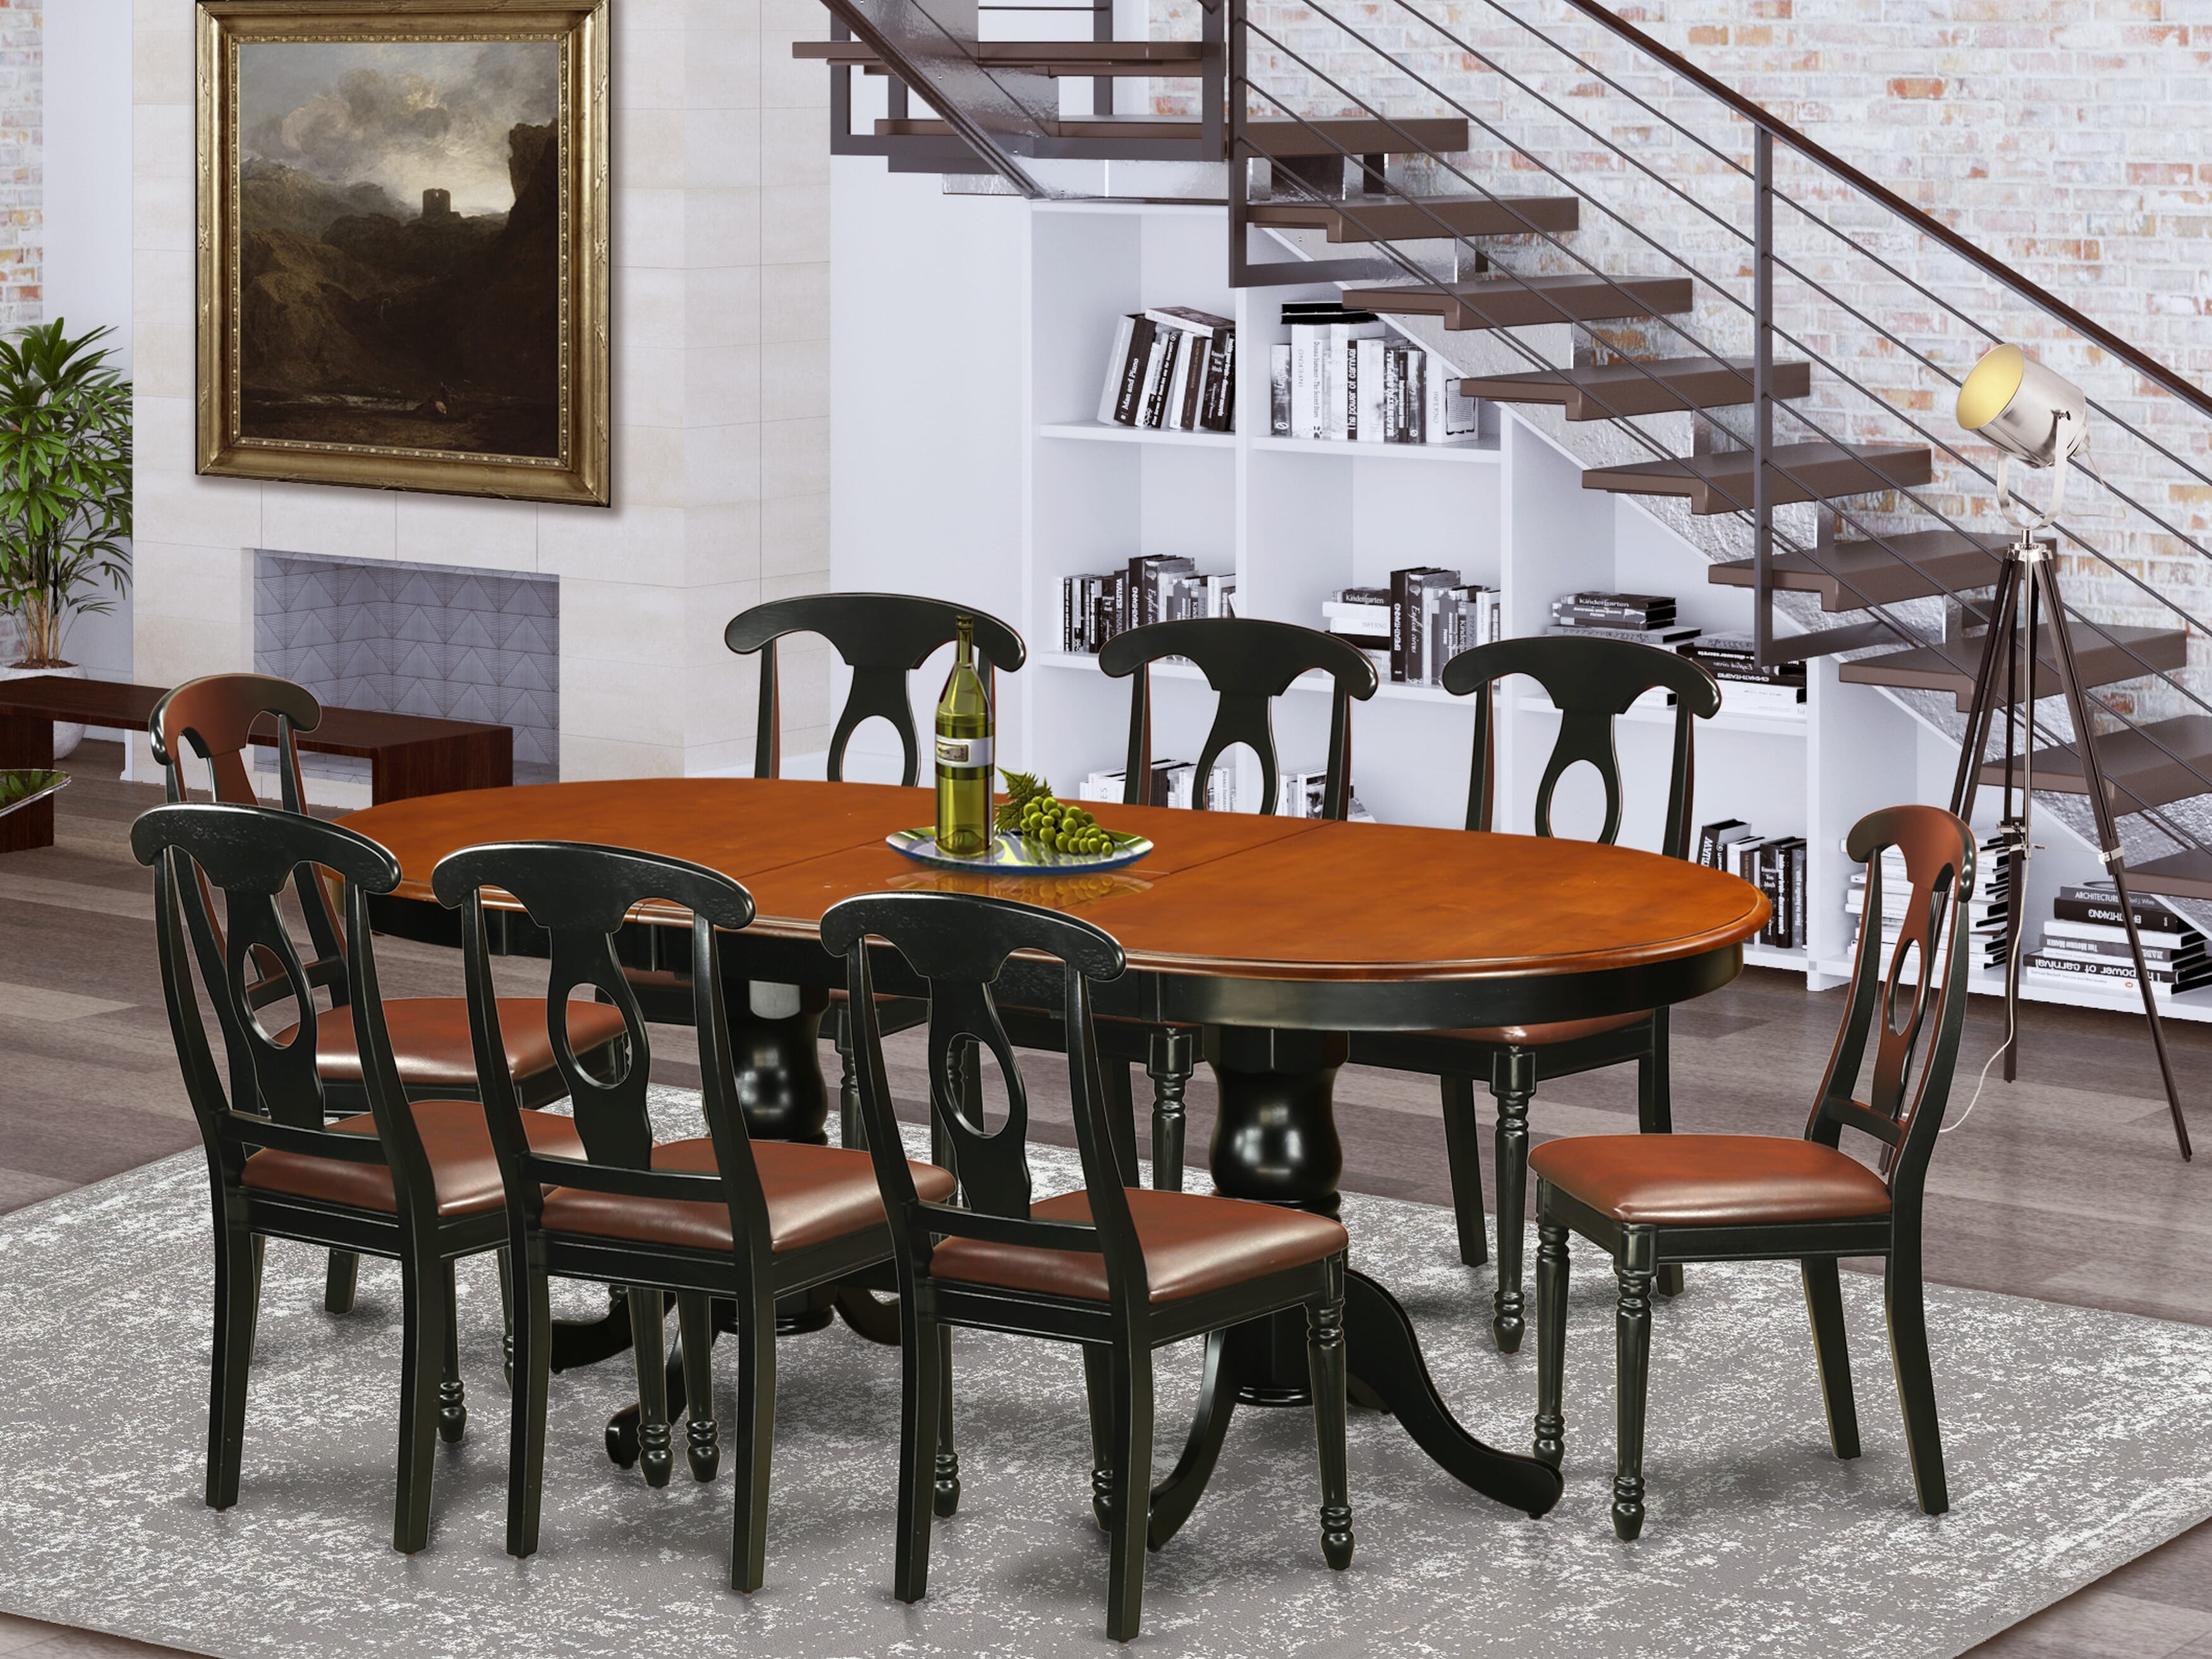 9 Pc Oval Dining room Table with Leaf and Leatherette Seat Chairs in Black / Cherry